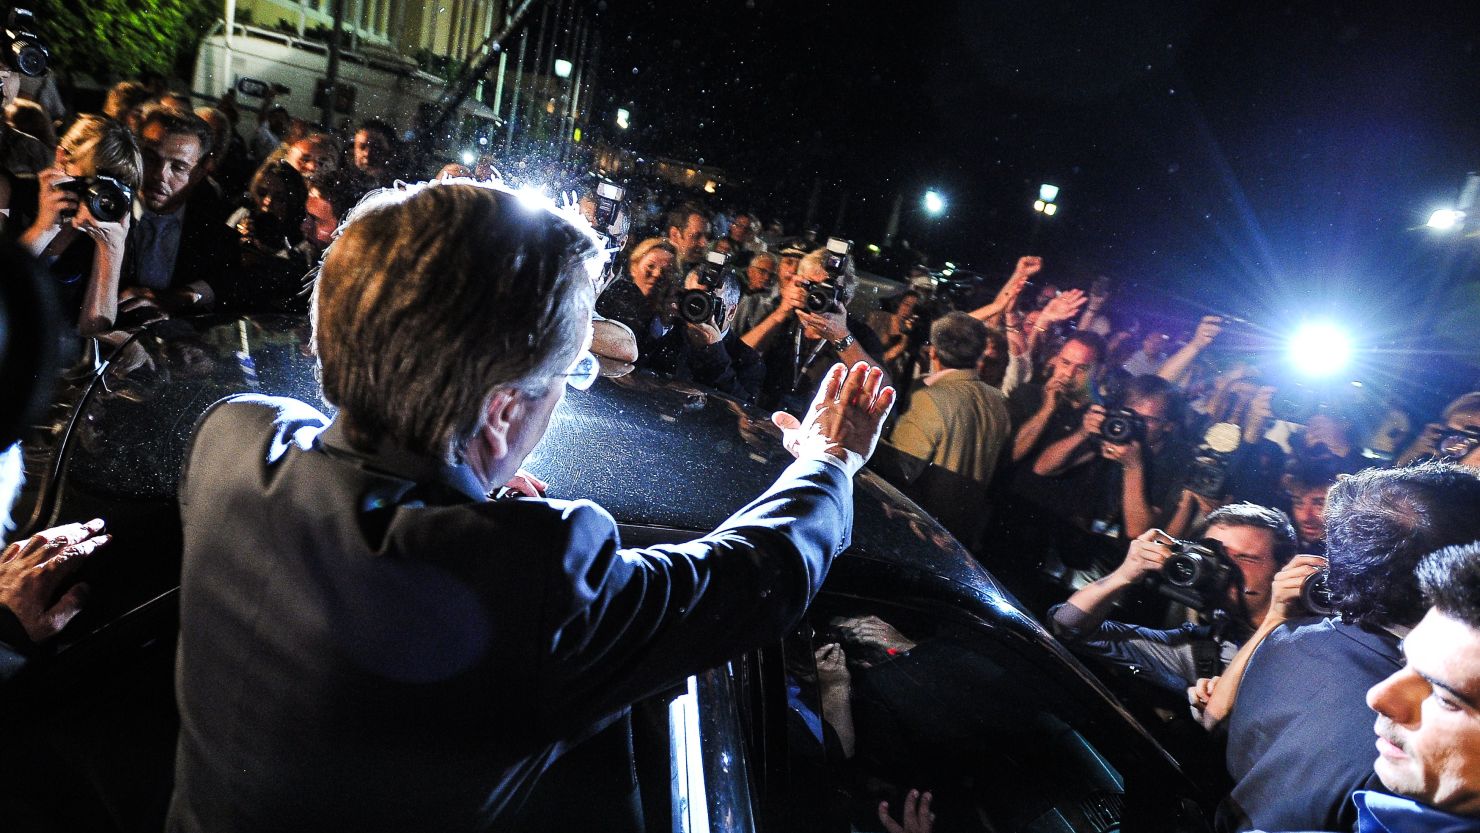 New Democracy party leader Antonis Samaras waves to supporters after a press conference in Athens, on June 17, 2012. 